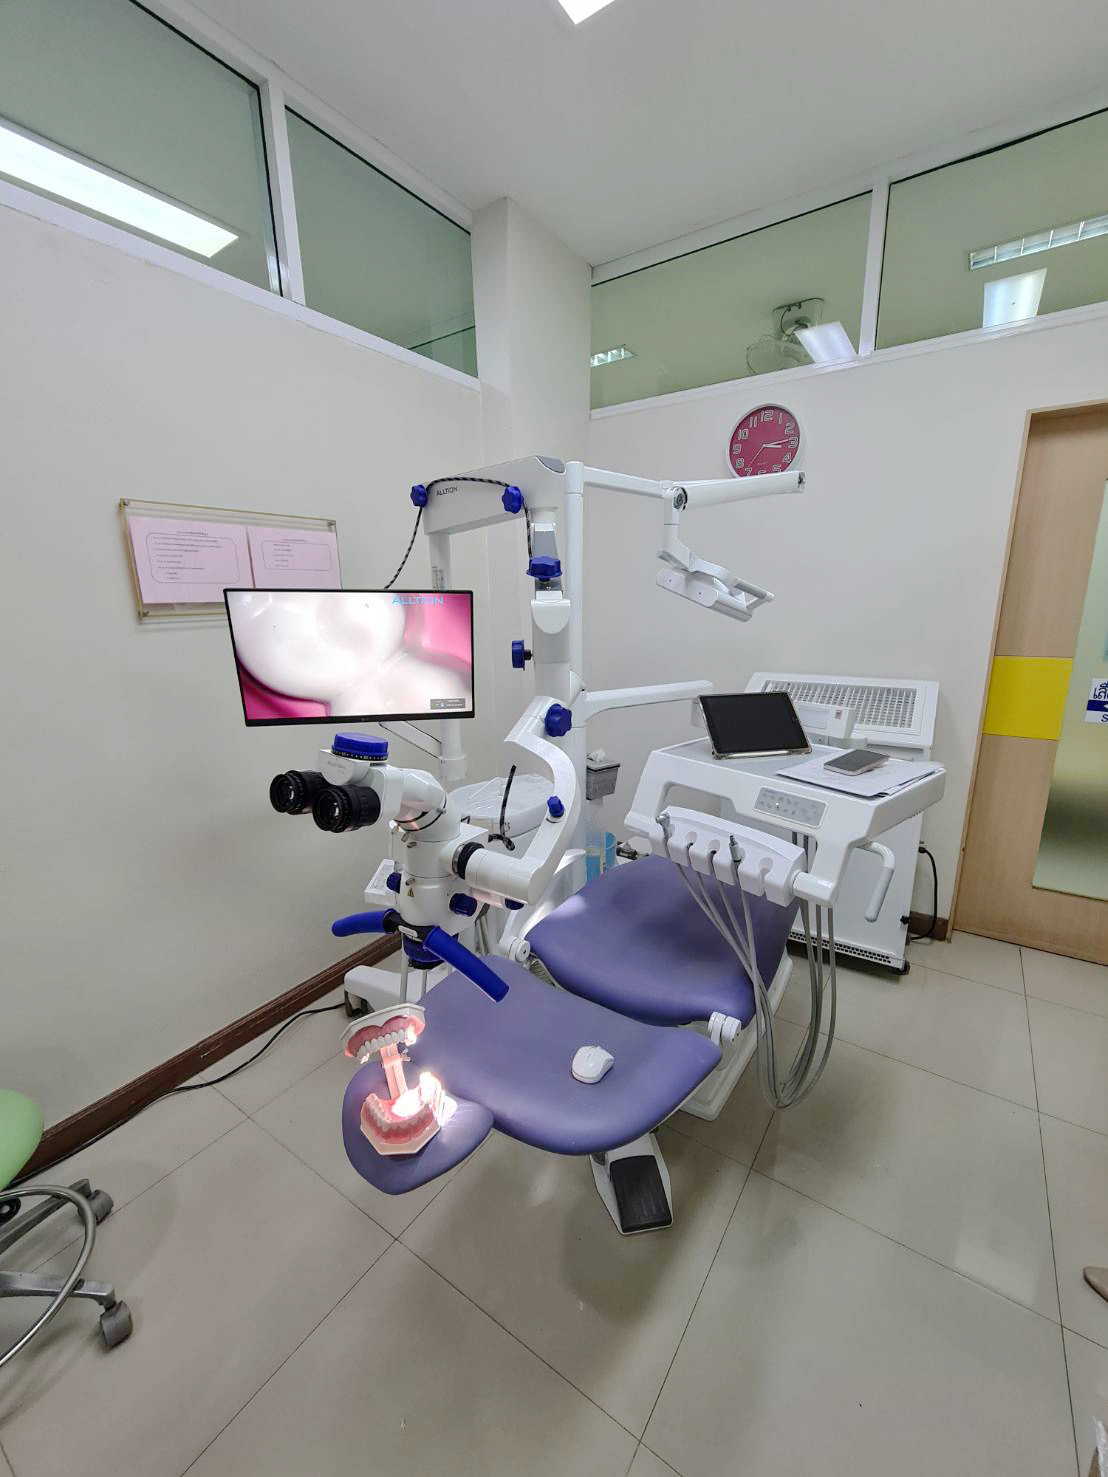 ALLTION AM-2000 Dental Microscope and ALL-CAM2 Full Function Camera Are Once Again Installed in a Clinic in Thailand!